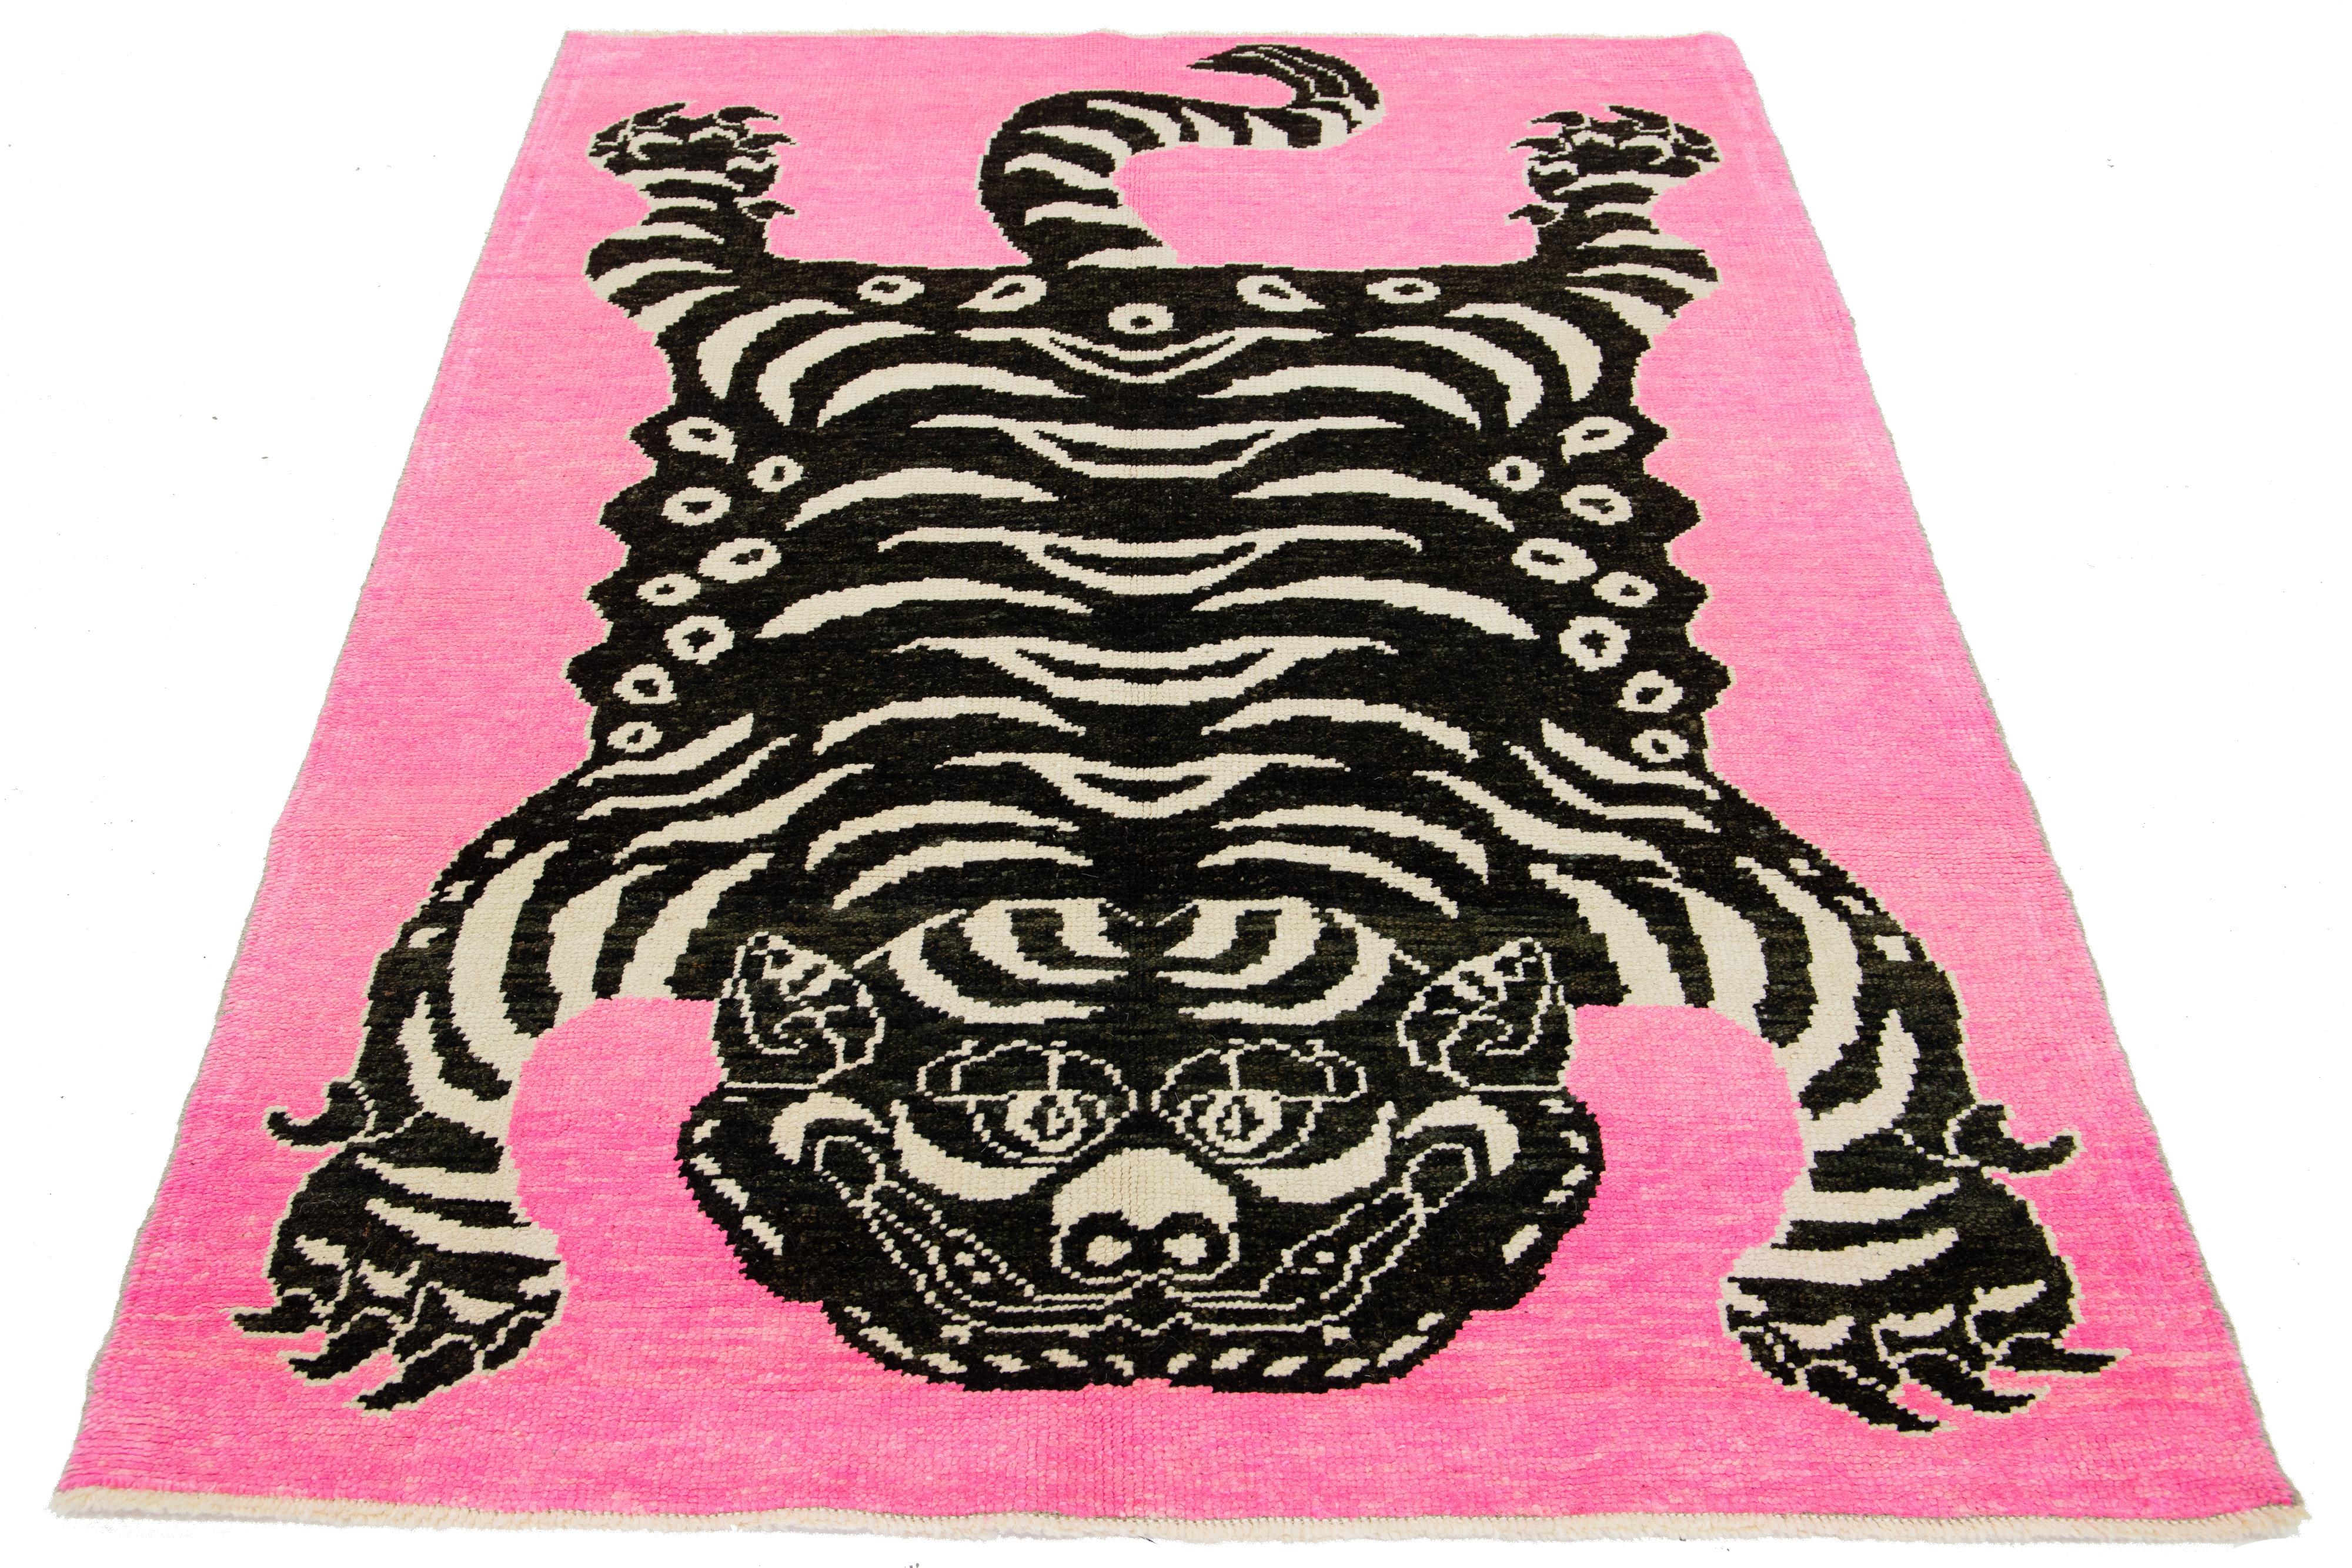 This room-size wool rug from Turkey showcases a stunning tiger pictorial design with a pink backdrop and accents in black and beige. It is meticulously handmade with attention to detail.

This rug measures 4'10